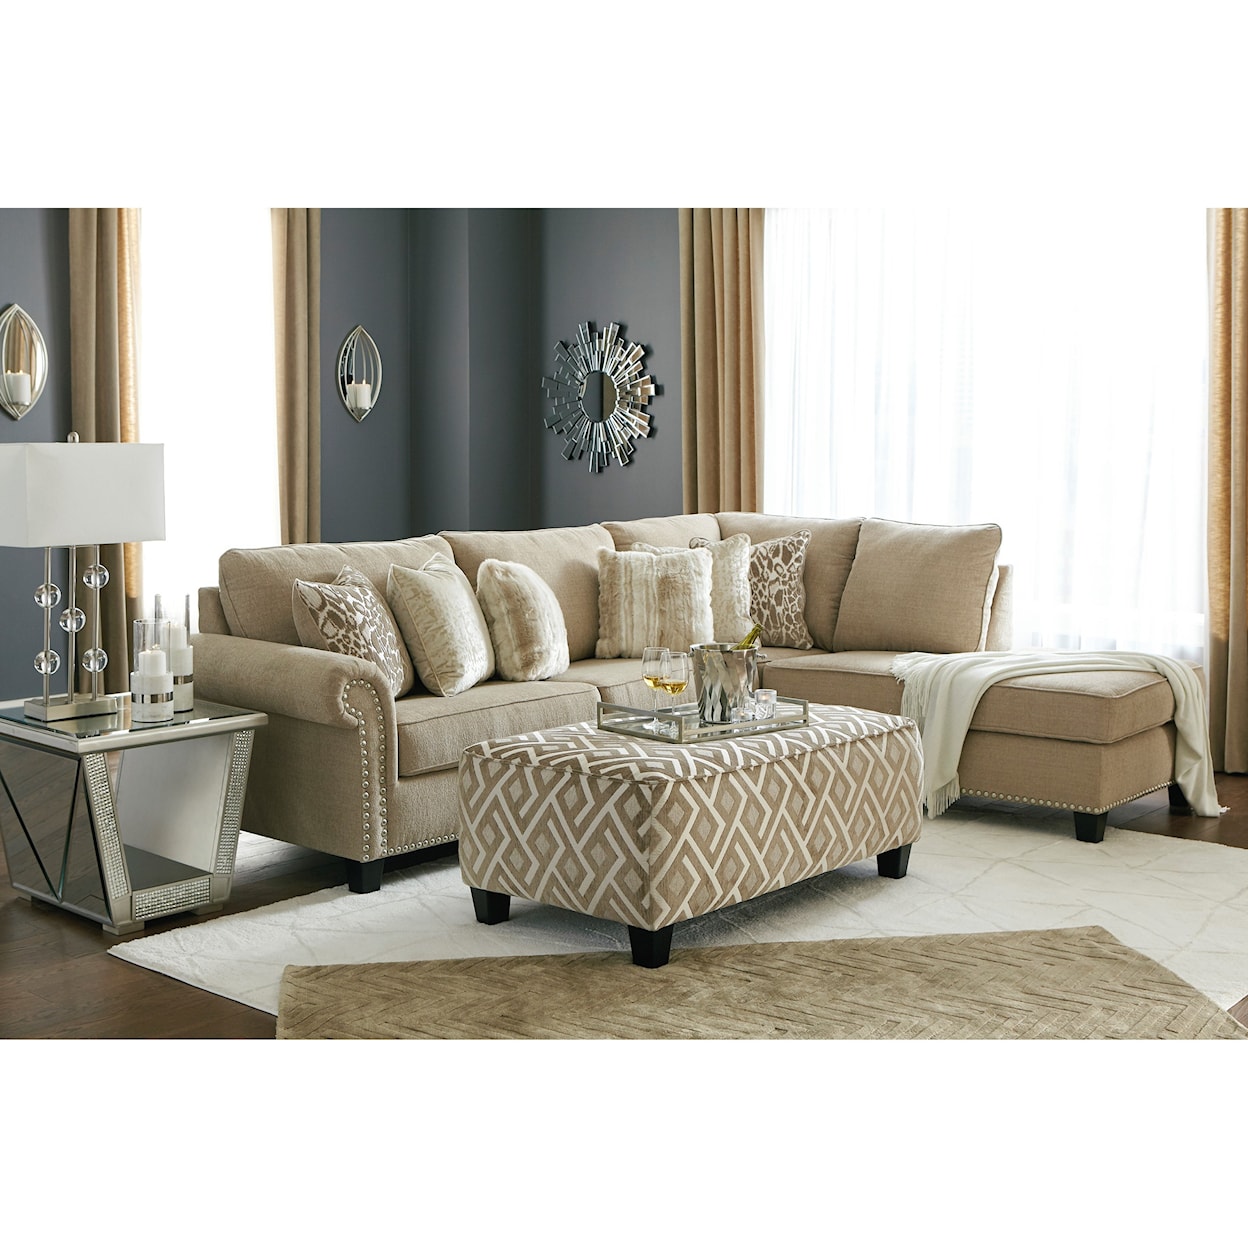 Signature Design by Ashley Dovemont Living Room Group